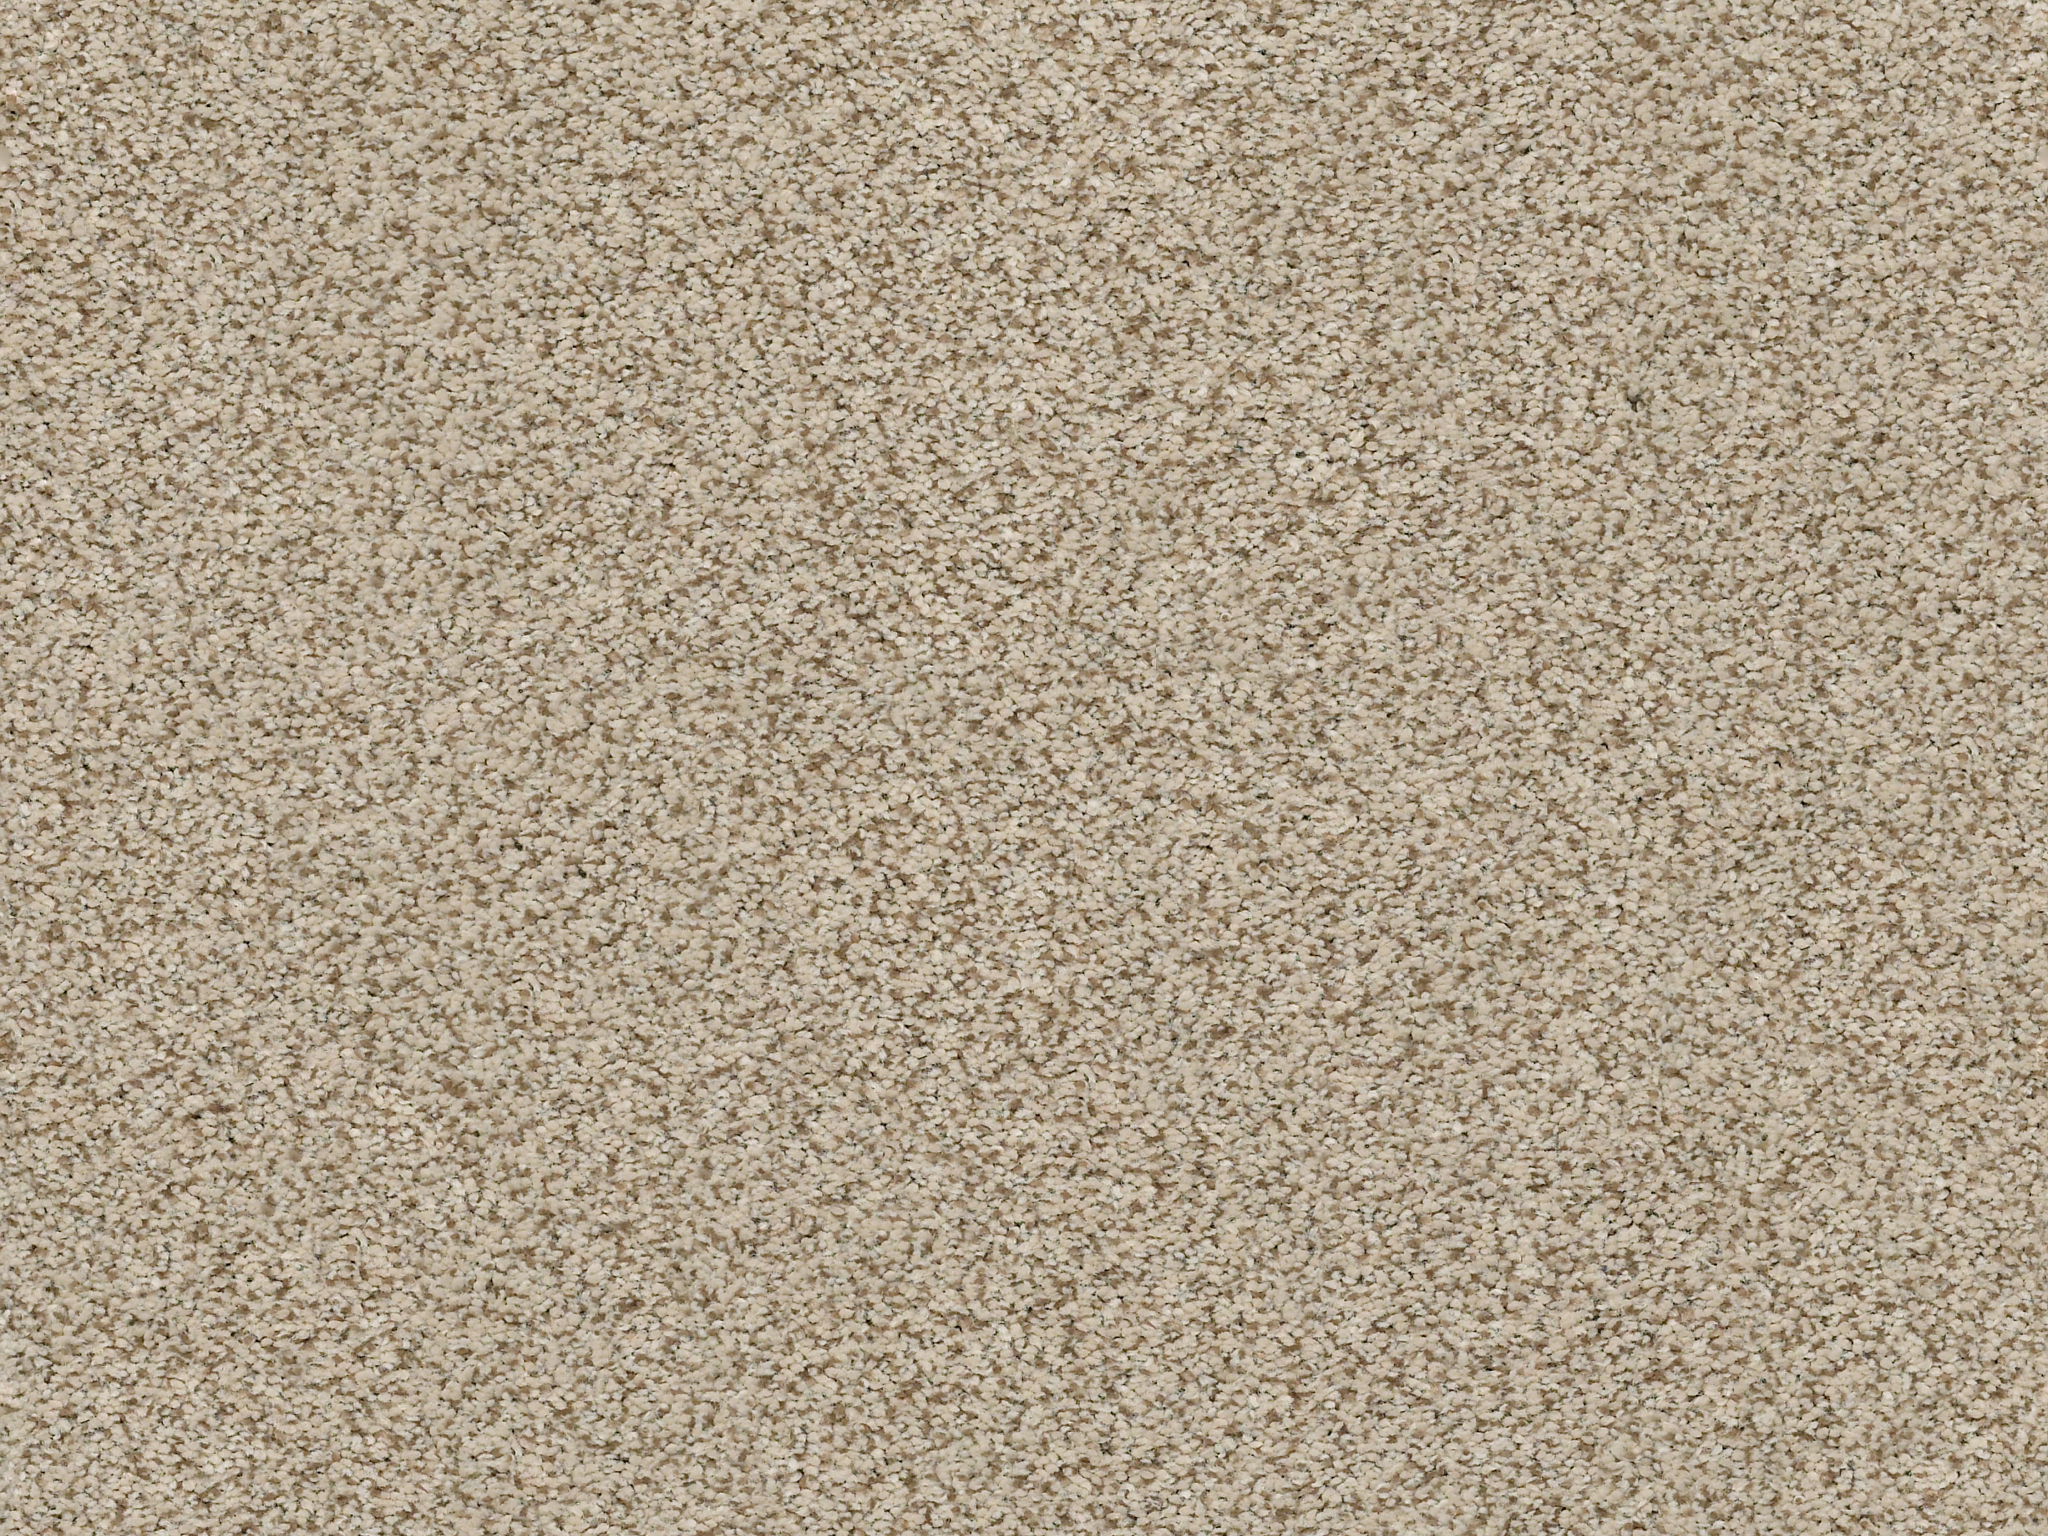 Serenity Cove Carpet - Meditation Zoomed Swatch Thumbnail